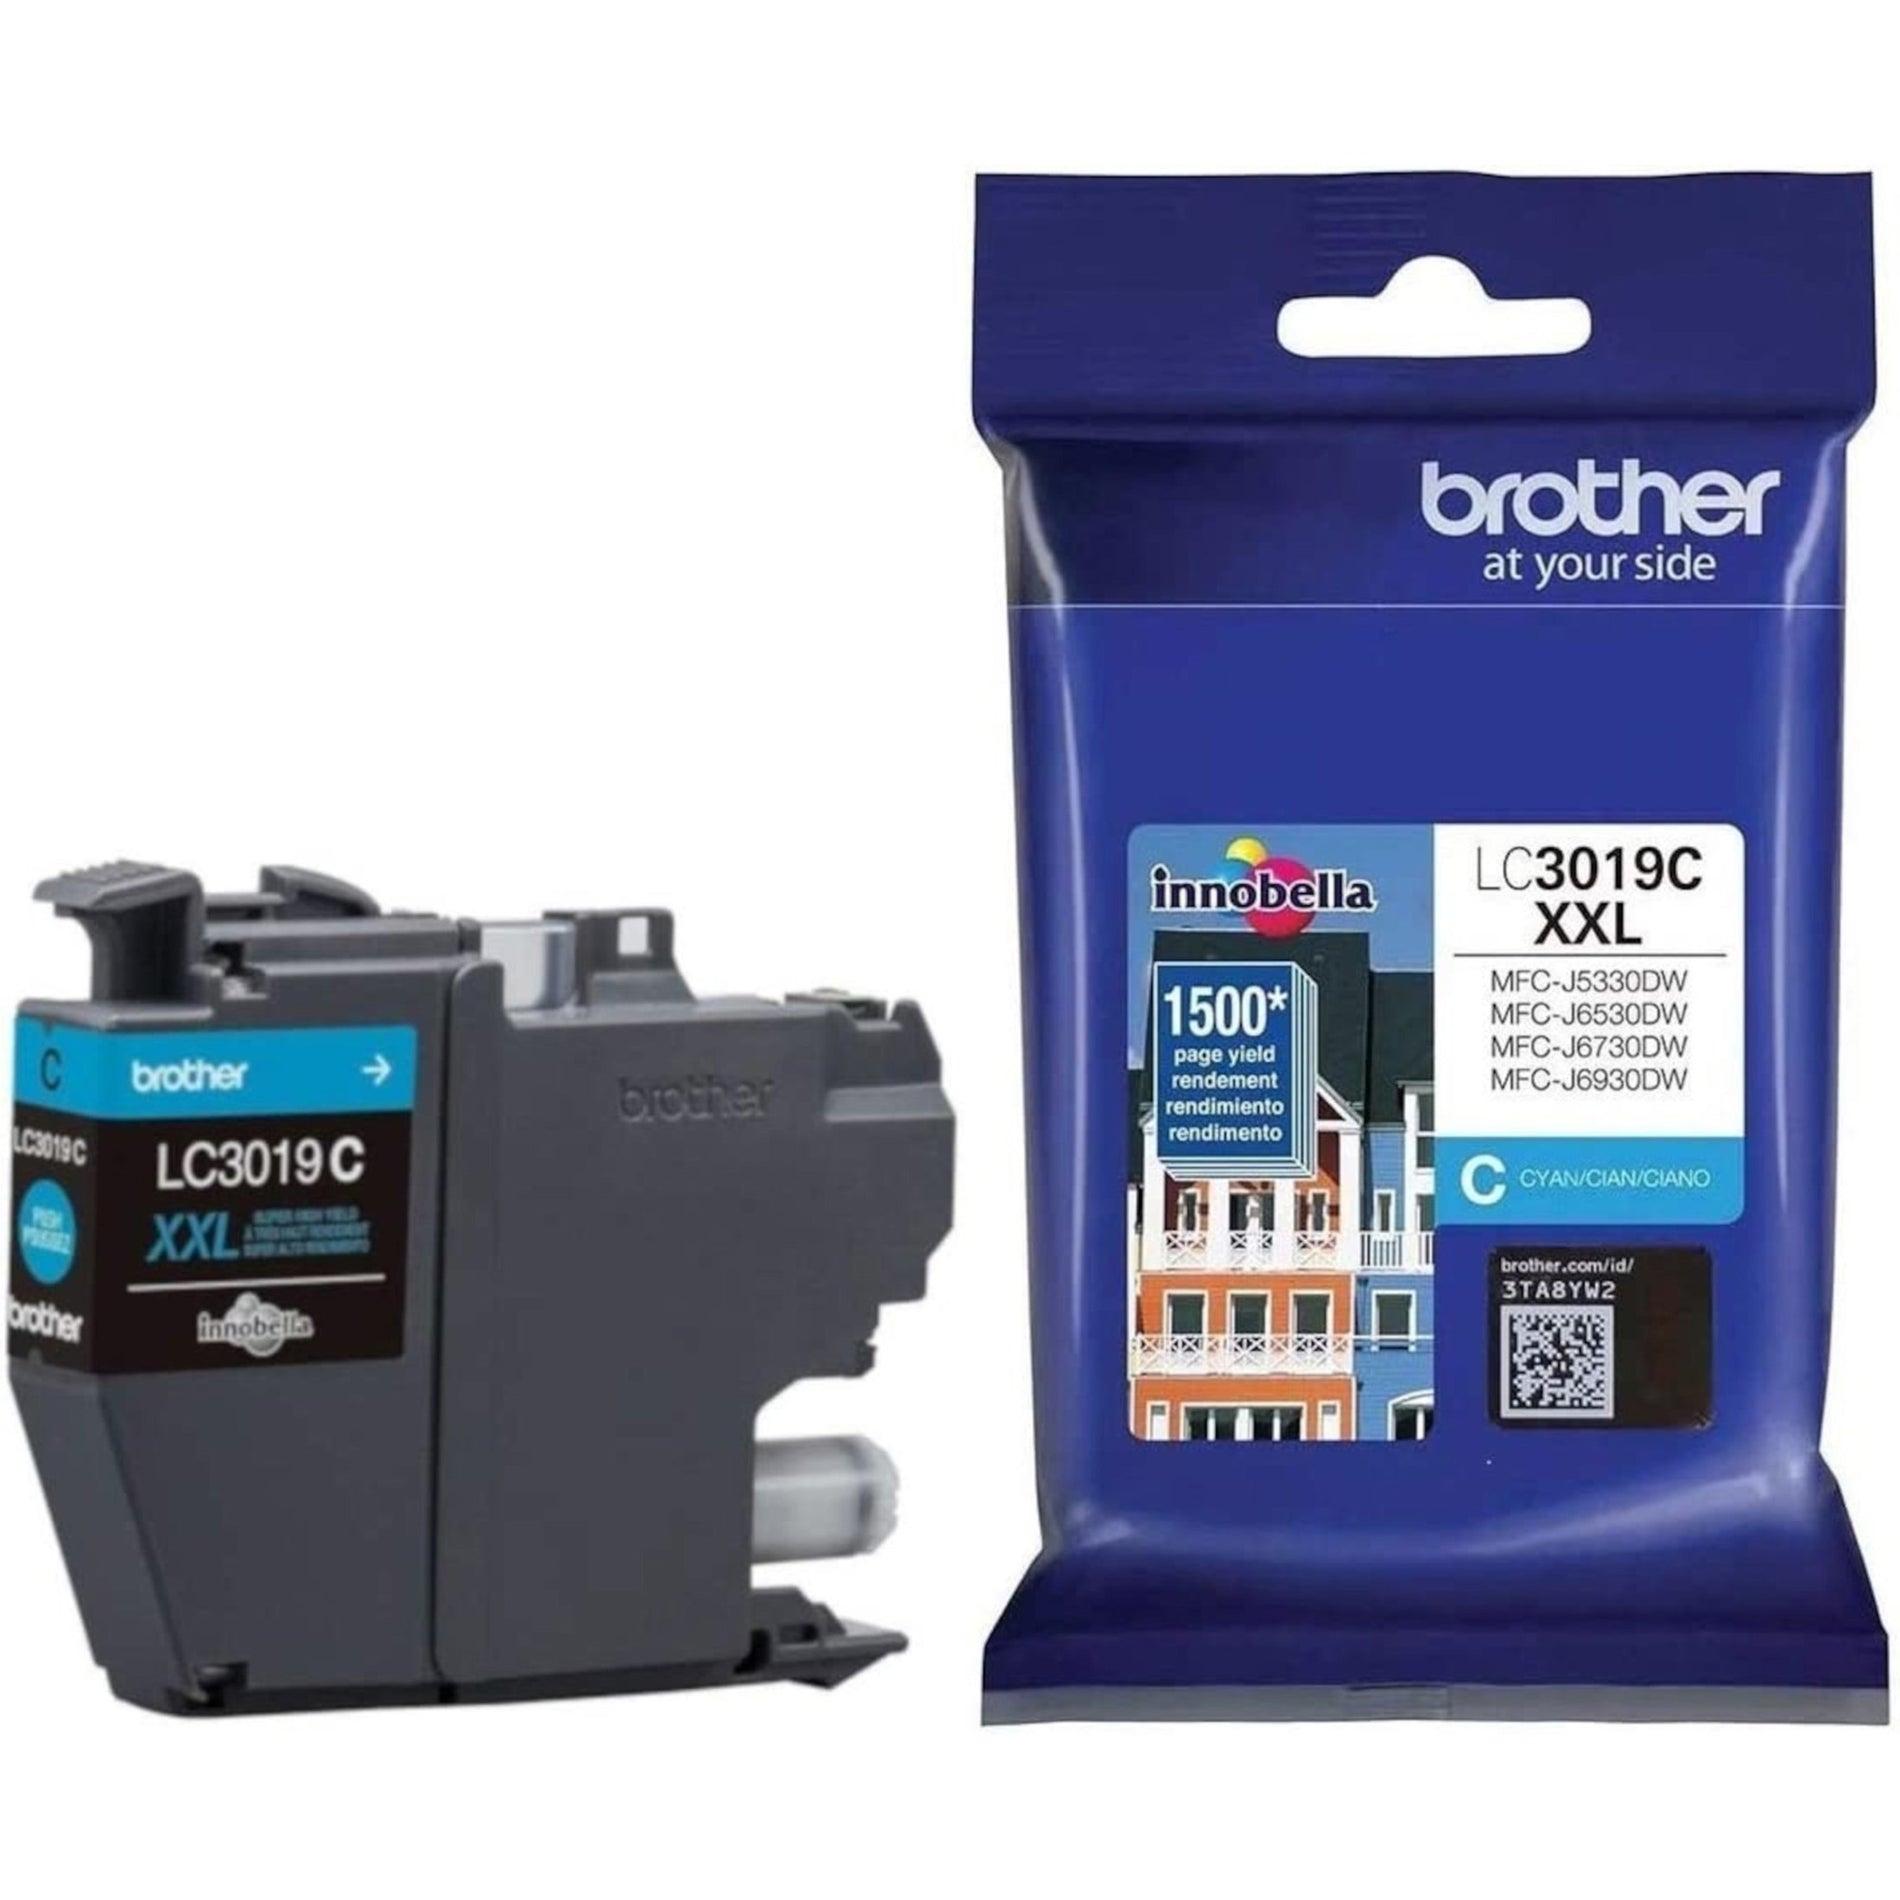 Brother LC3019C Innobella Super High Yield Cyan Ink Cartridge, 1500 Pages